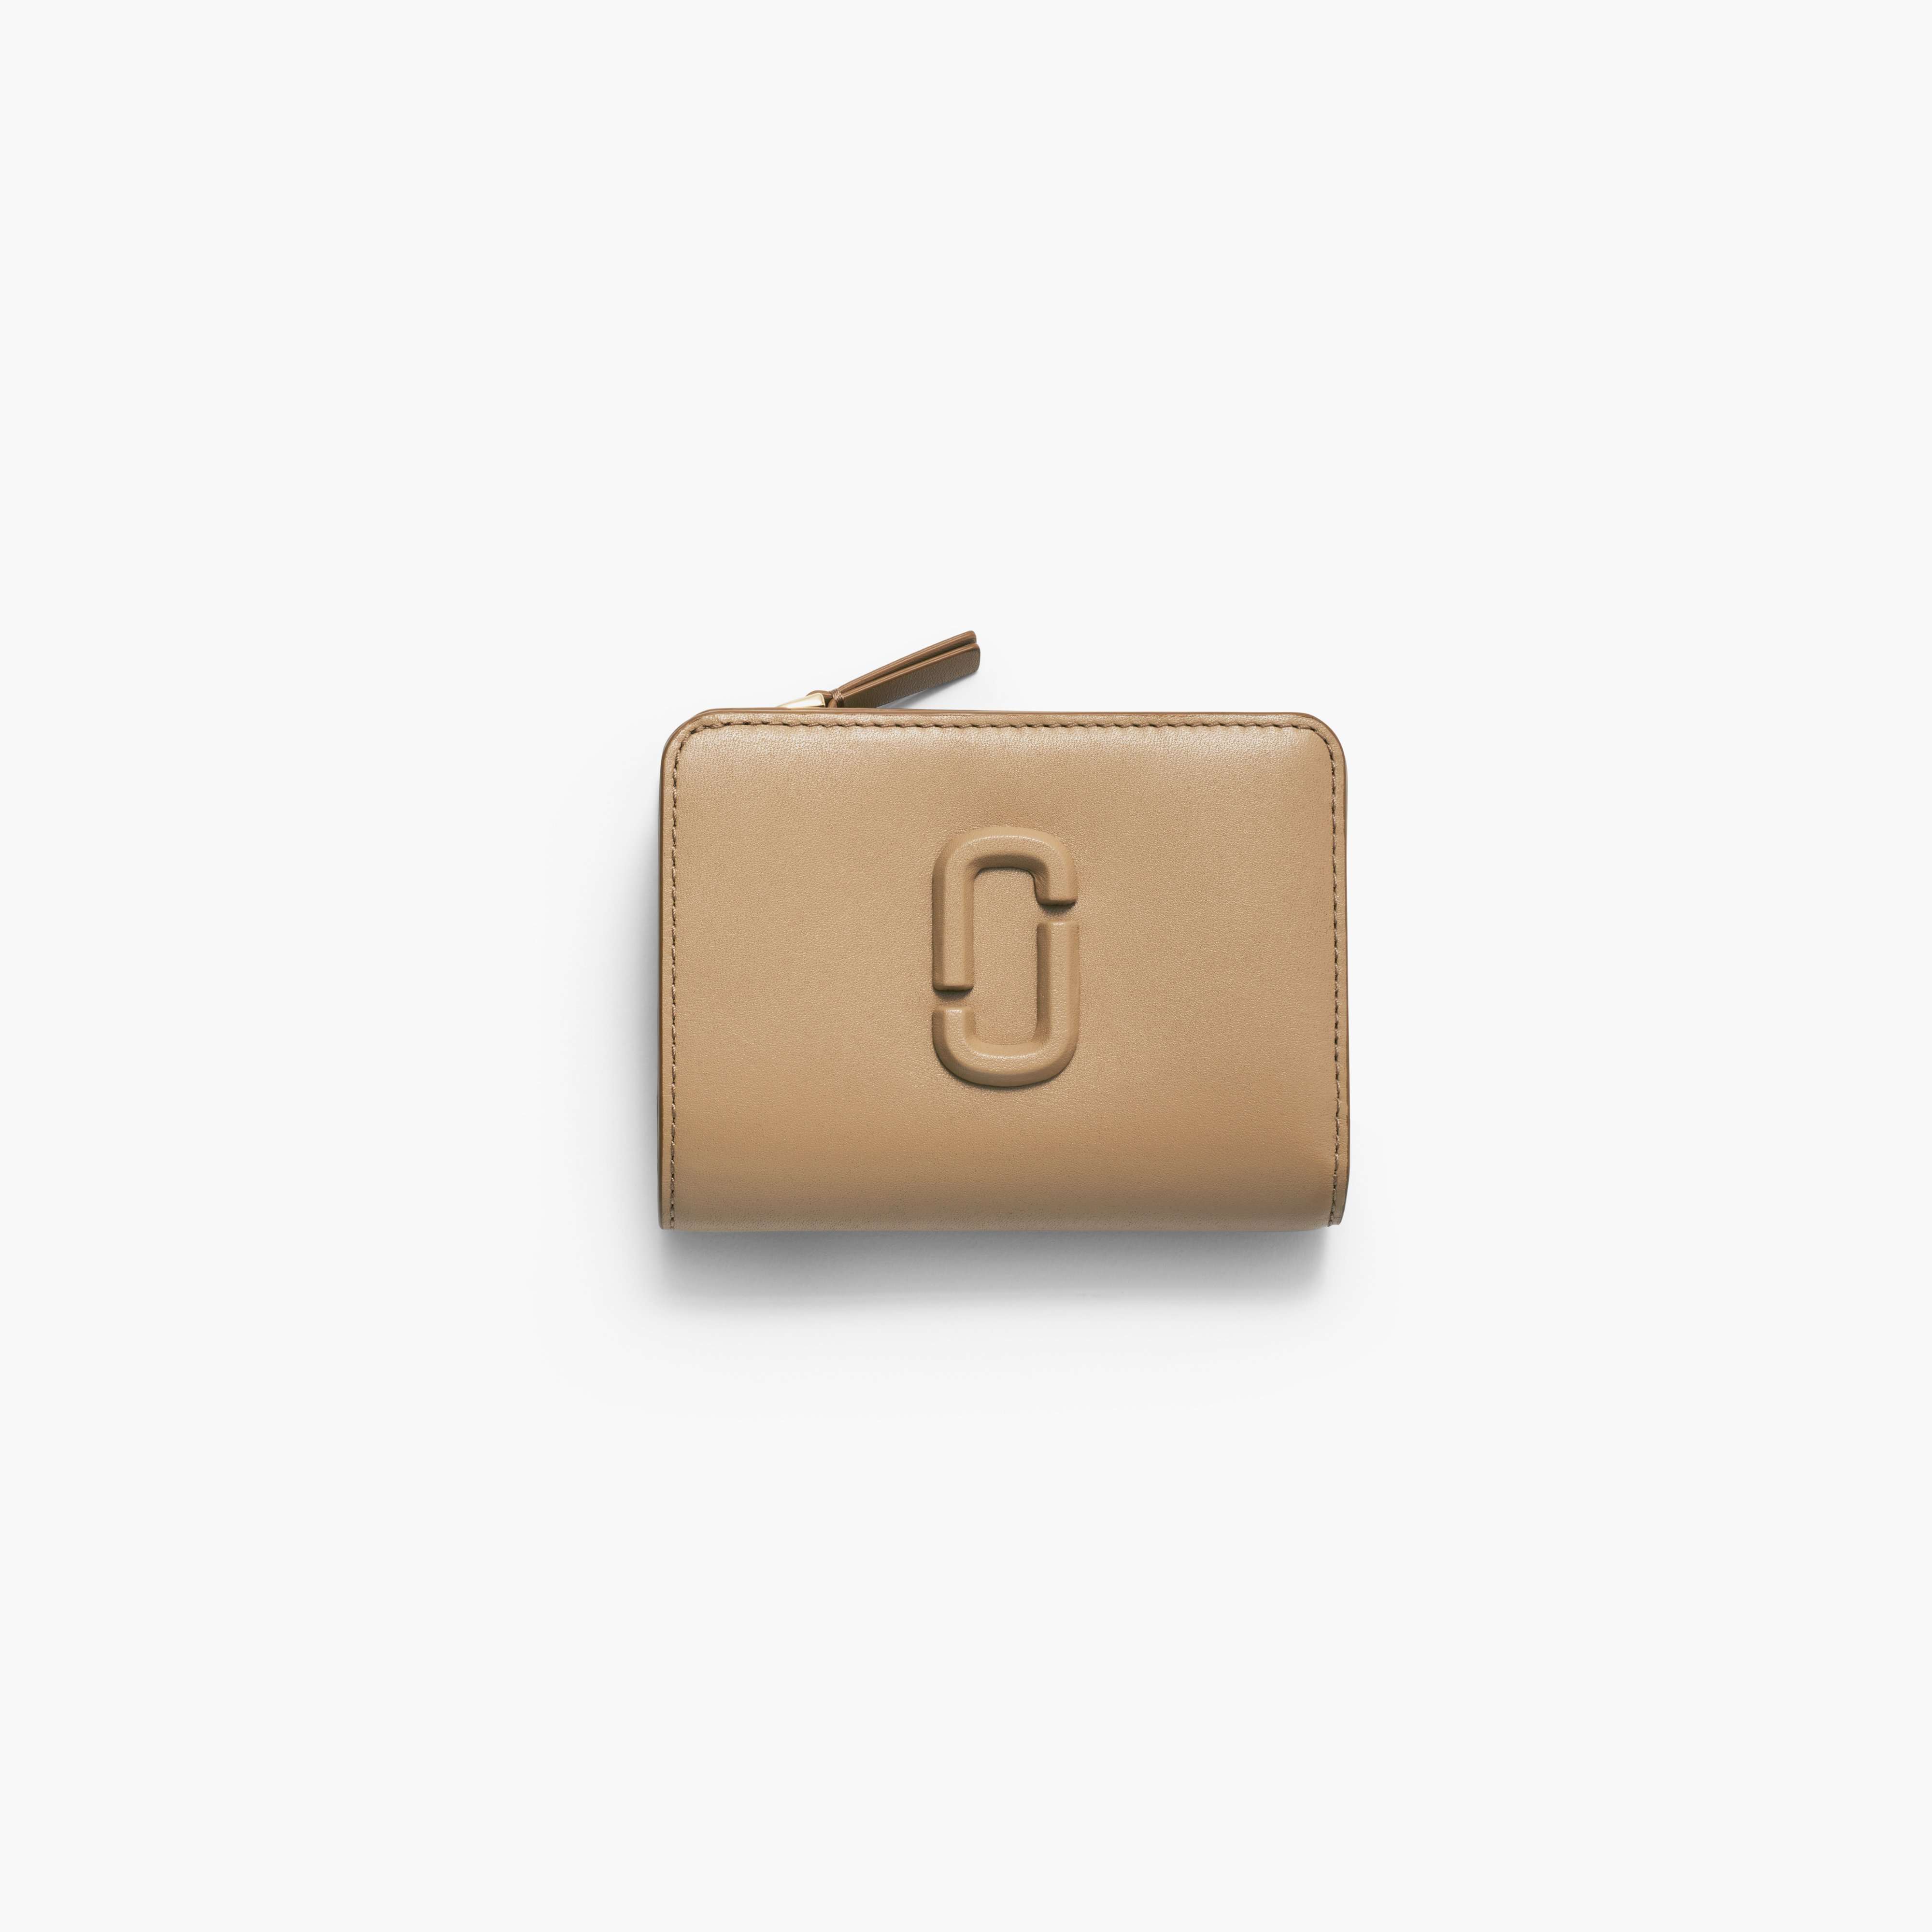 The Leather J Marc Mini Compact Wallet in Camel